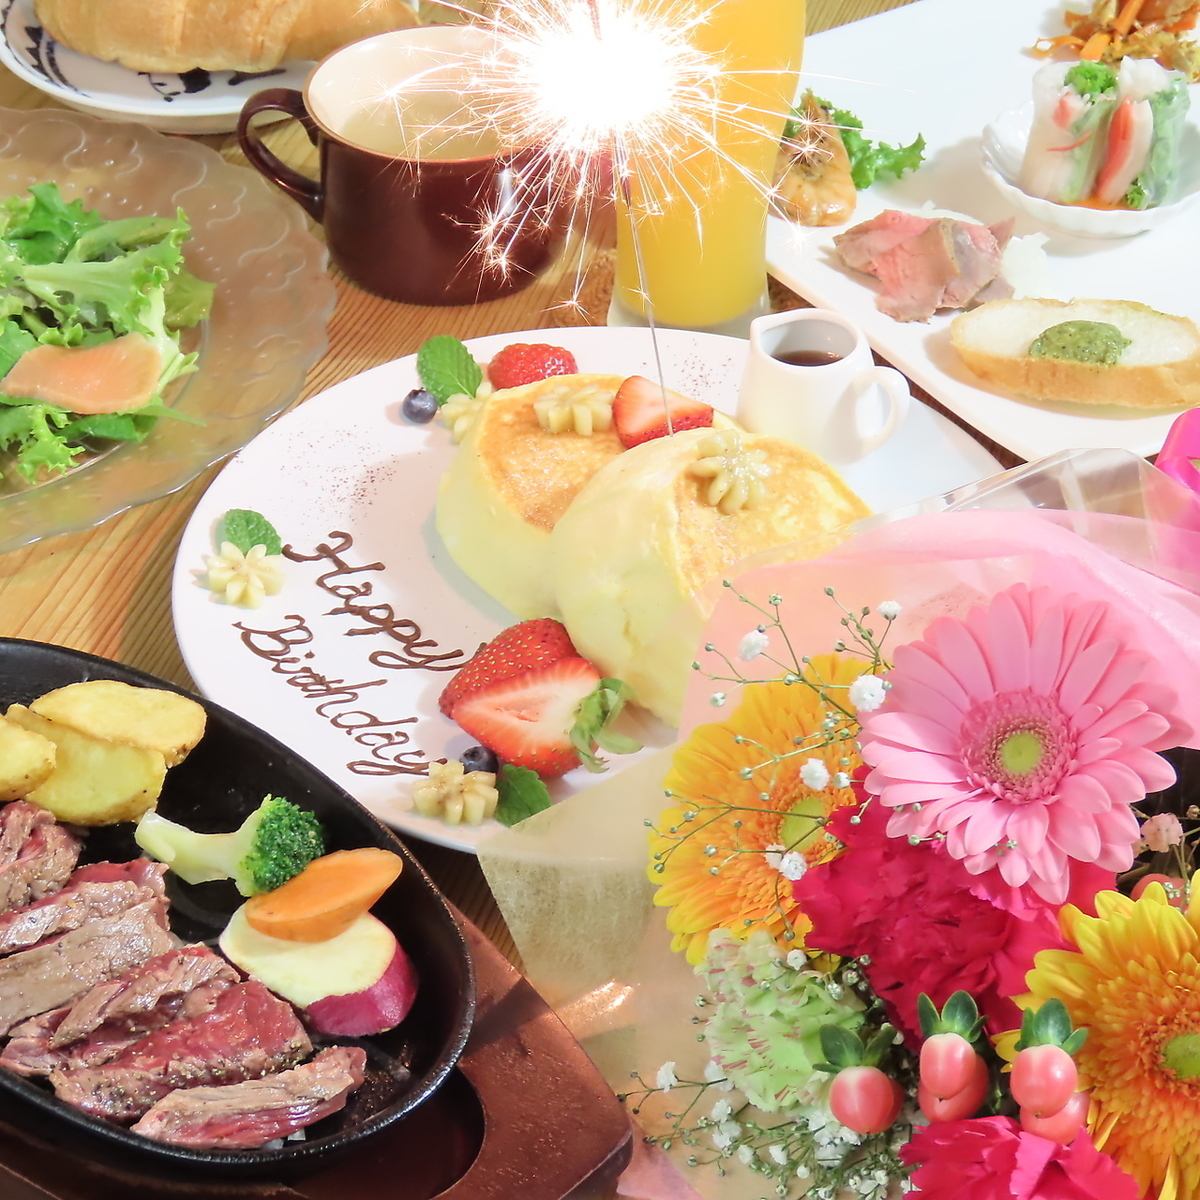 We are preparing courses perfect for girls' parties and anniversaries♪